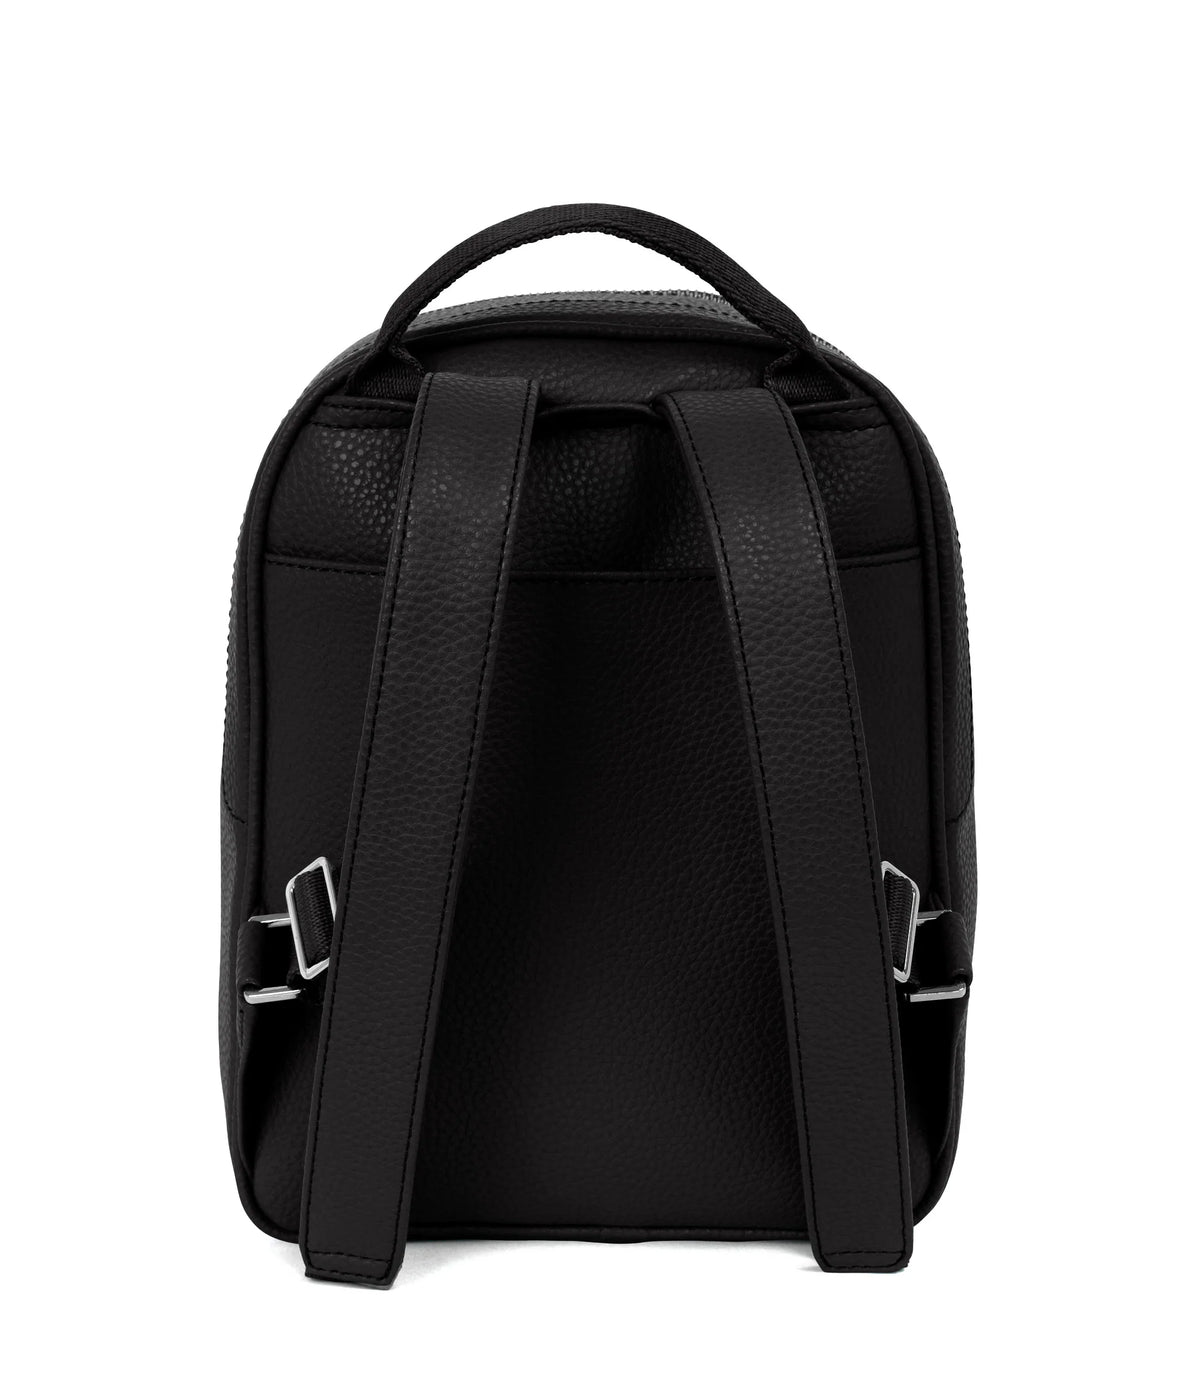 Harlem Purity Backpack - Small